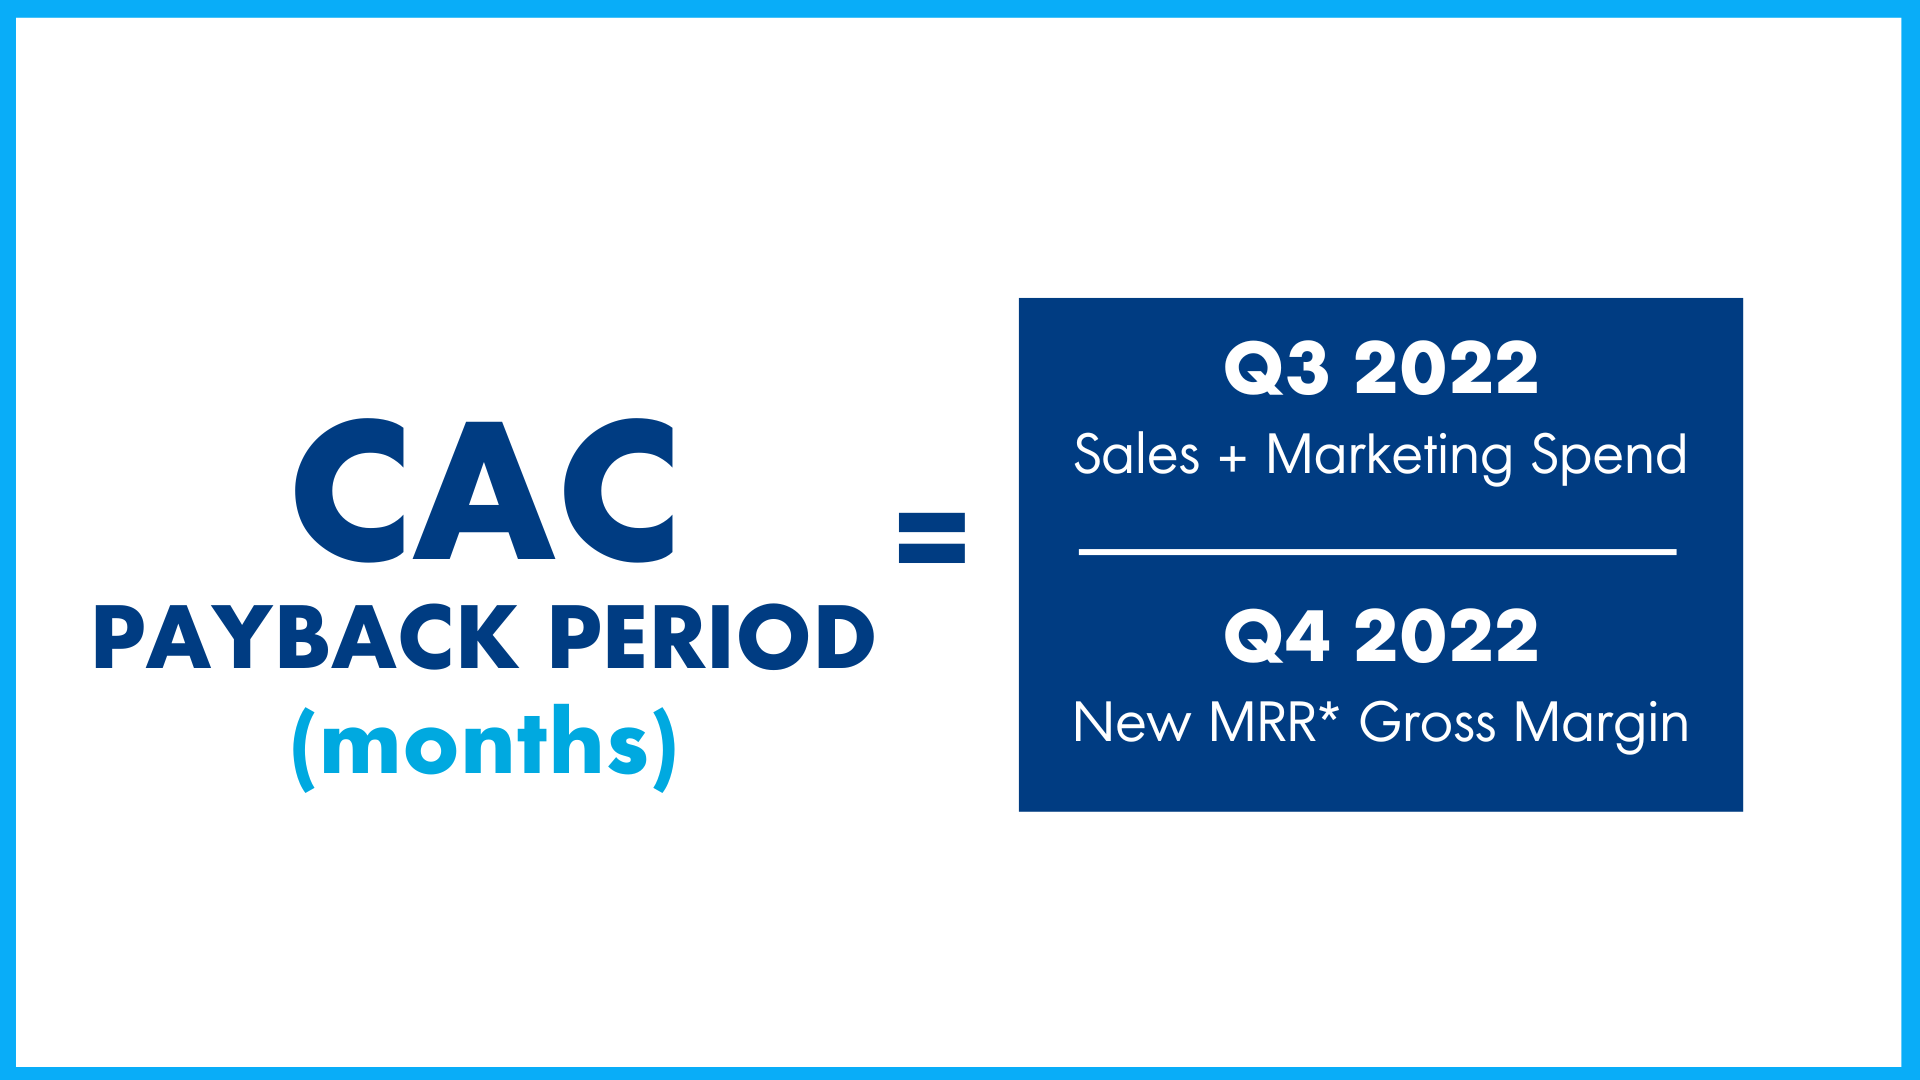 Infographic showing the breakdown of what a good CAC payback period is.